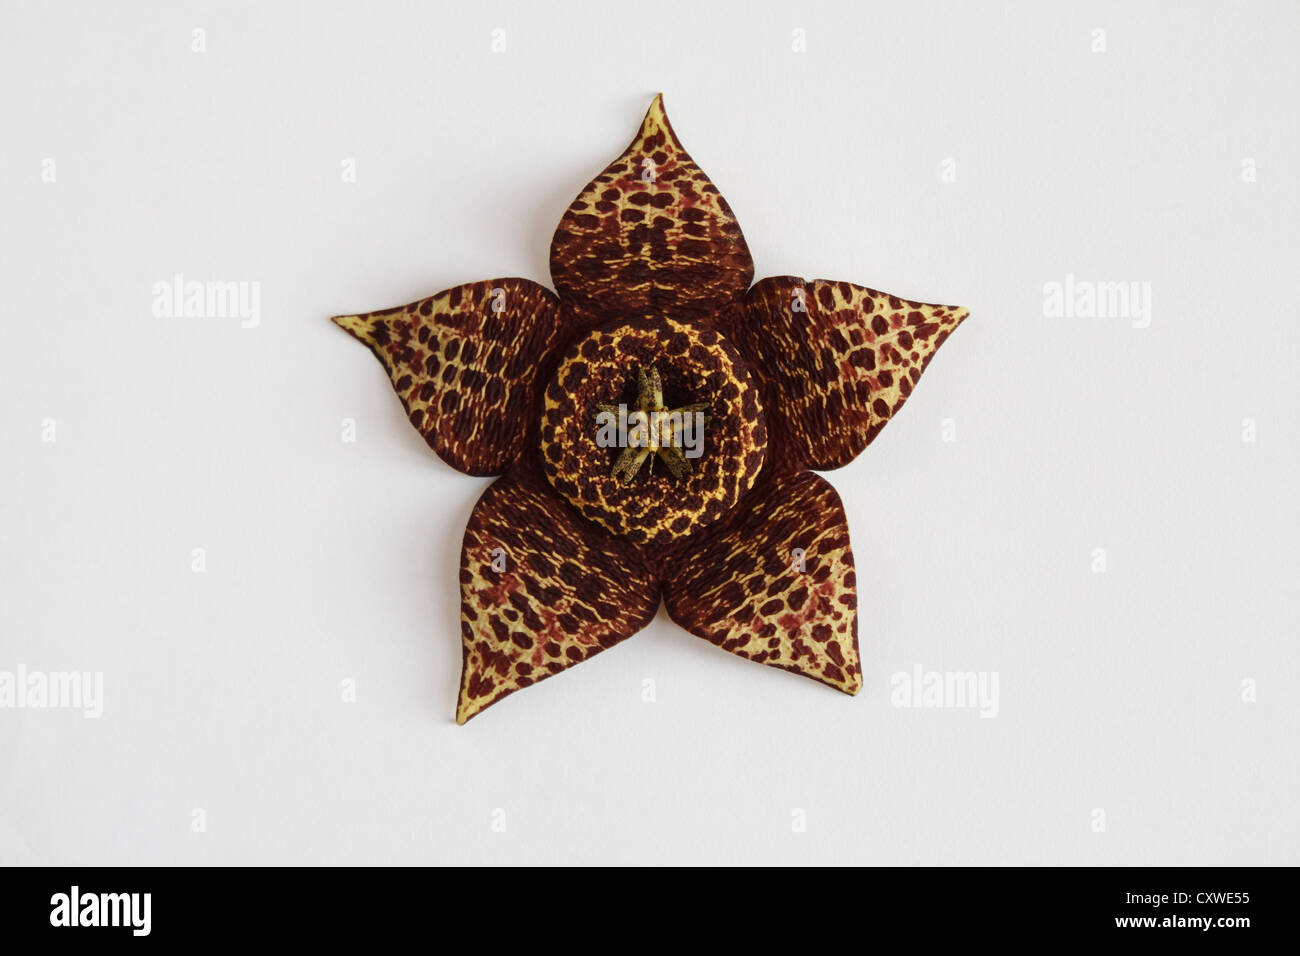 A star flower (starfish) Cactus Orbea variegata syn Staphilia on a white background. Stock Photo